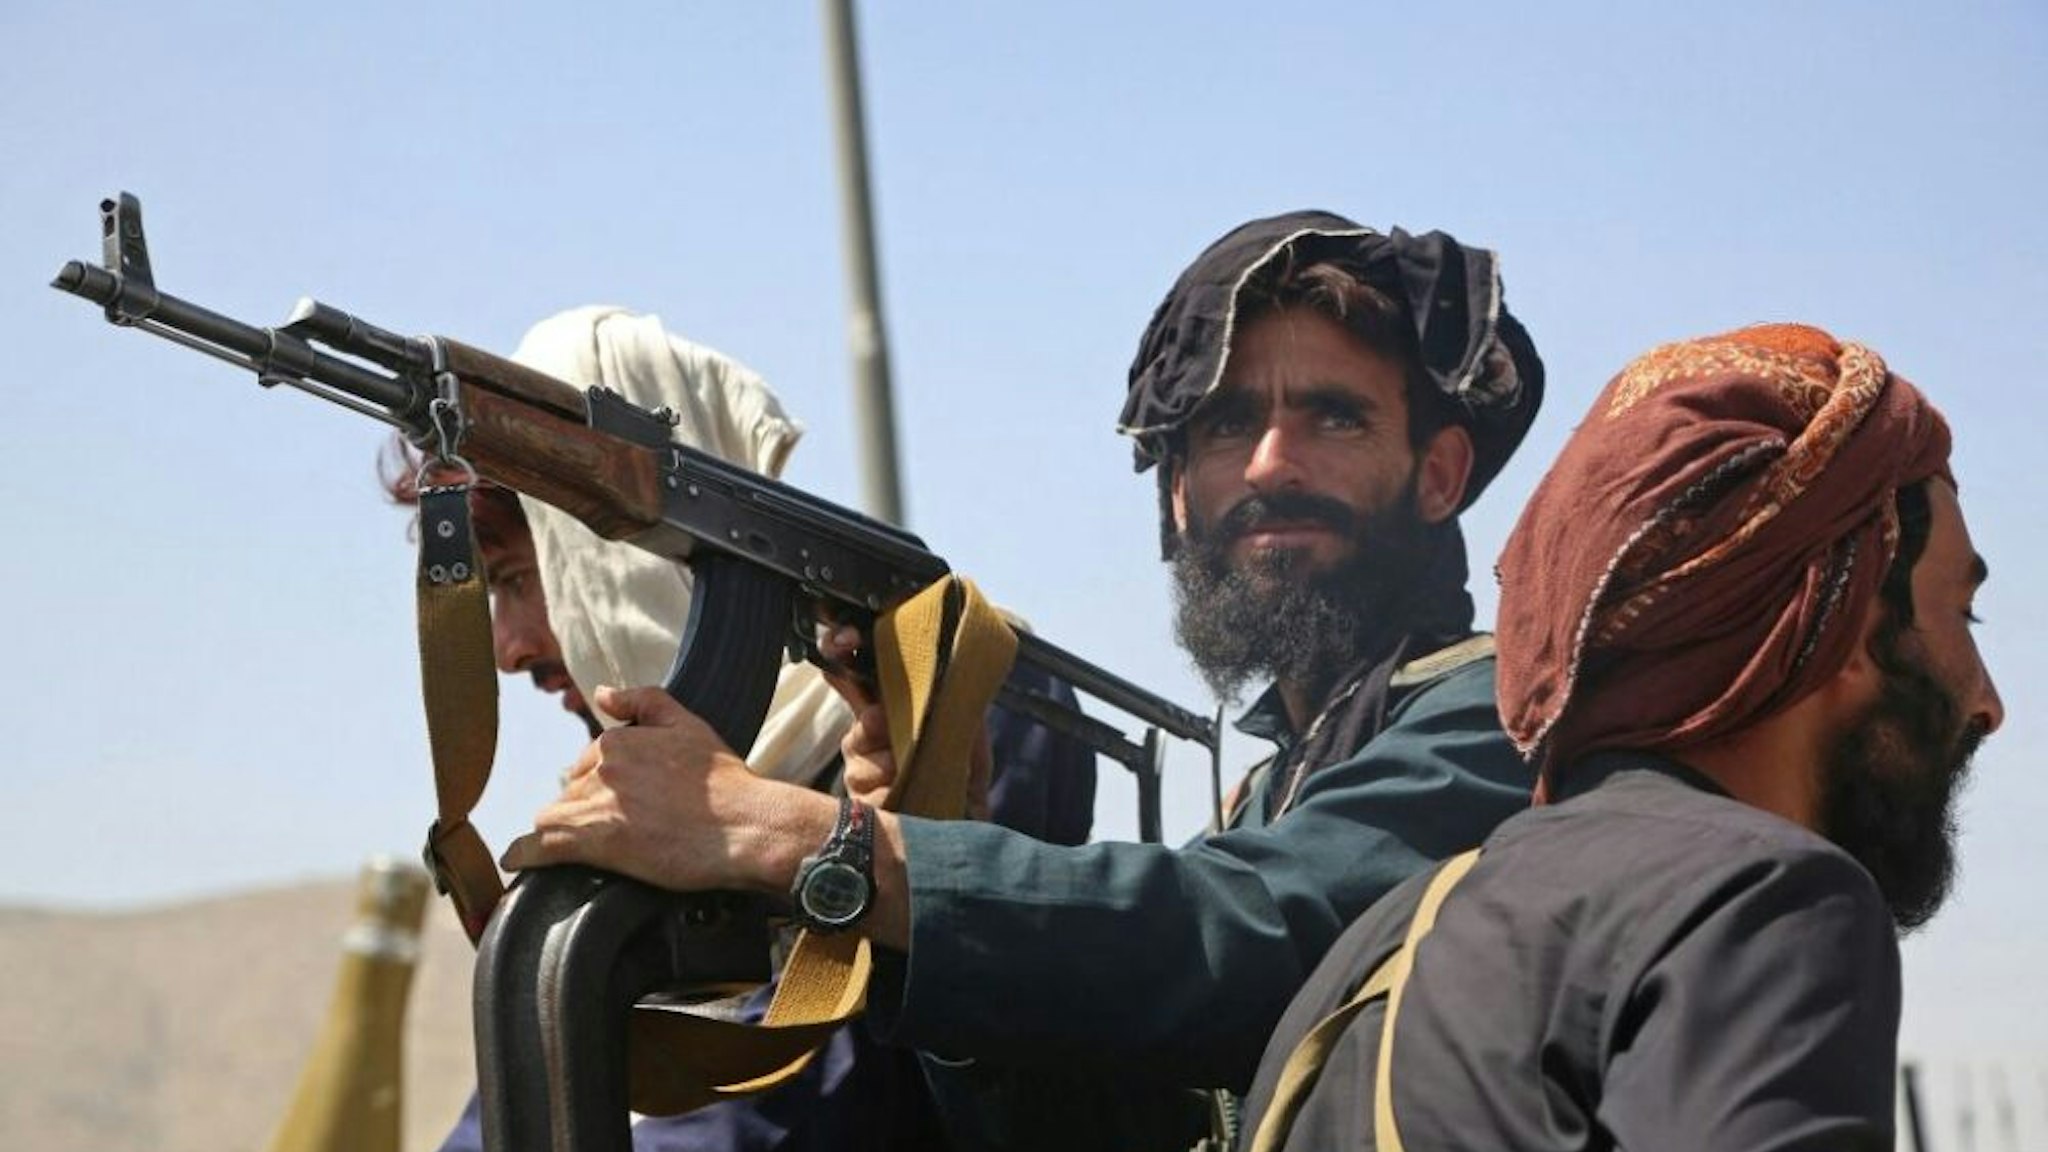 TOPSHOT - Taliban fighters stand guard in a vehicle along the roadside in Kabul on August 16, 2021, after a stunningly swift end to Afghanistan's 20-year war, as thousands of people mobbed the city's airport trying to flee the group's feared hardline brand of Islamist rule.